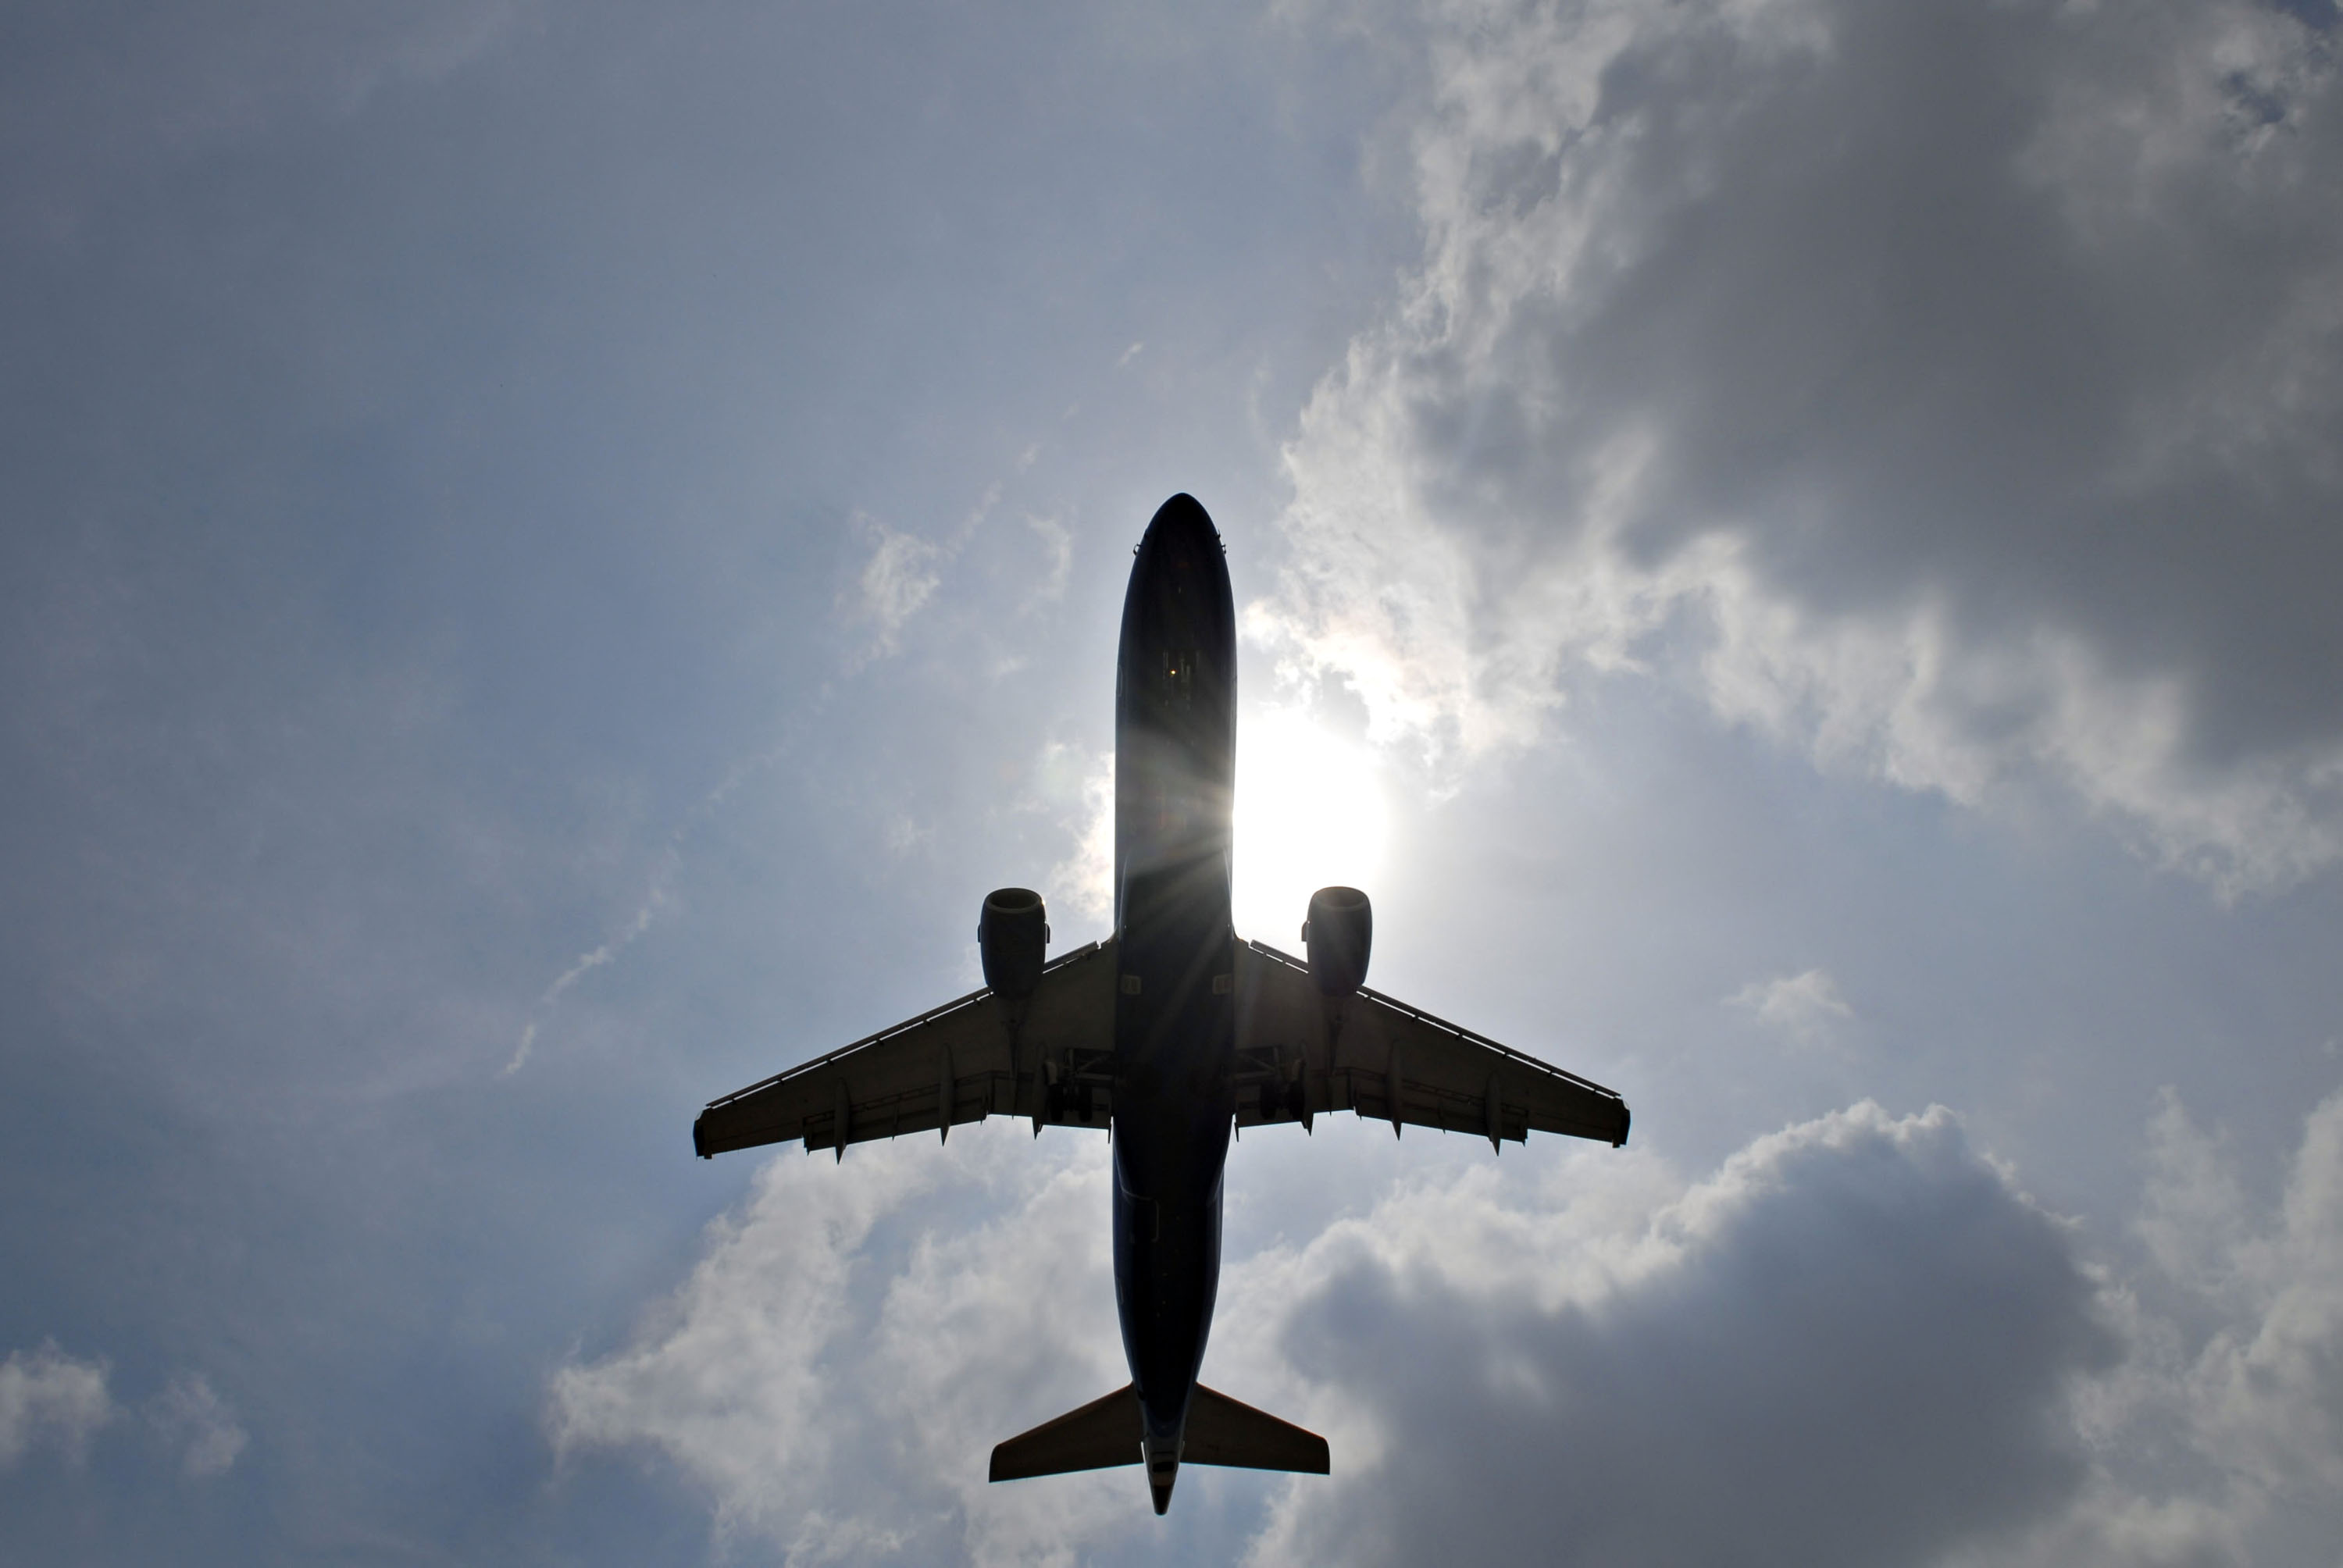 A jet lands at Hartsfield-Jackson International airport in A